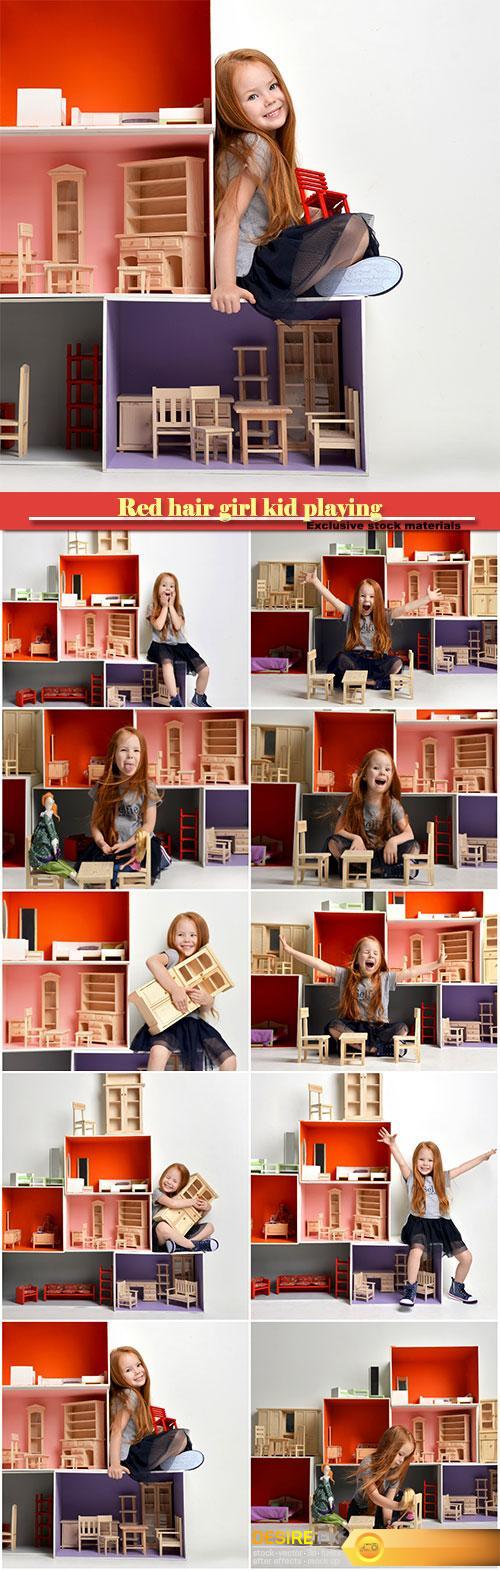 Red hair baby girl kid playing with dollhouse stuffed with mini furniture toys